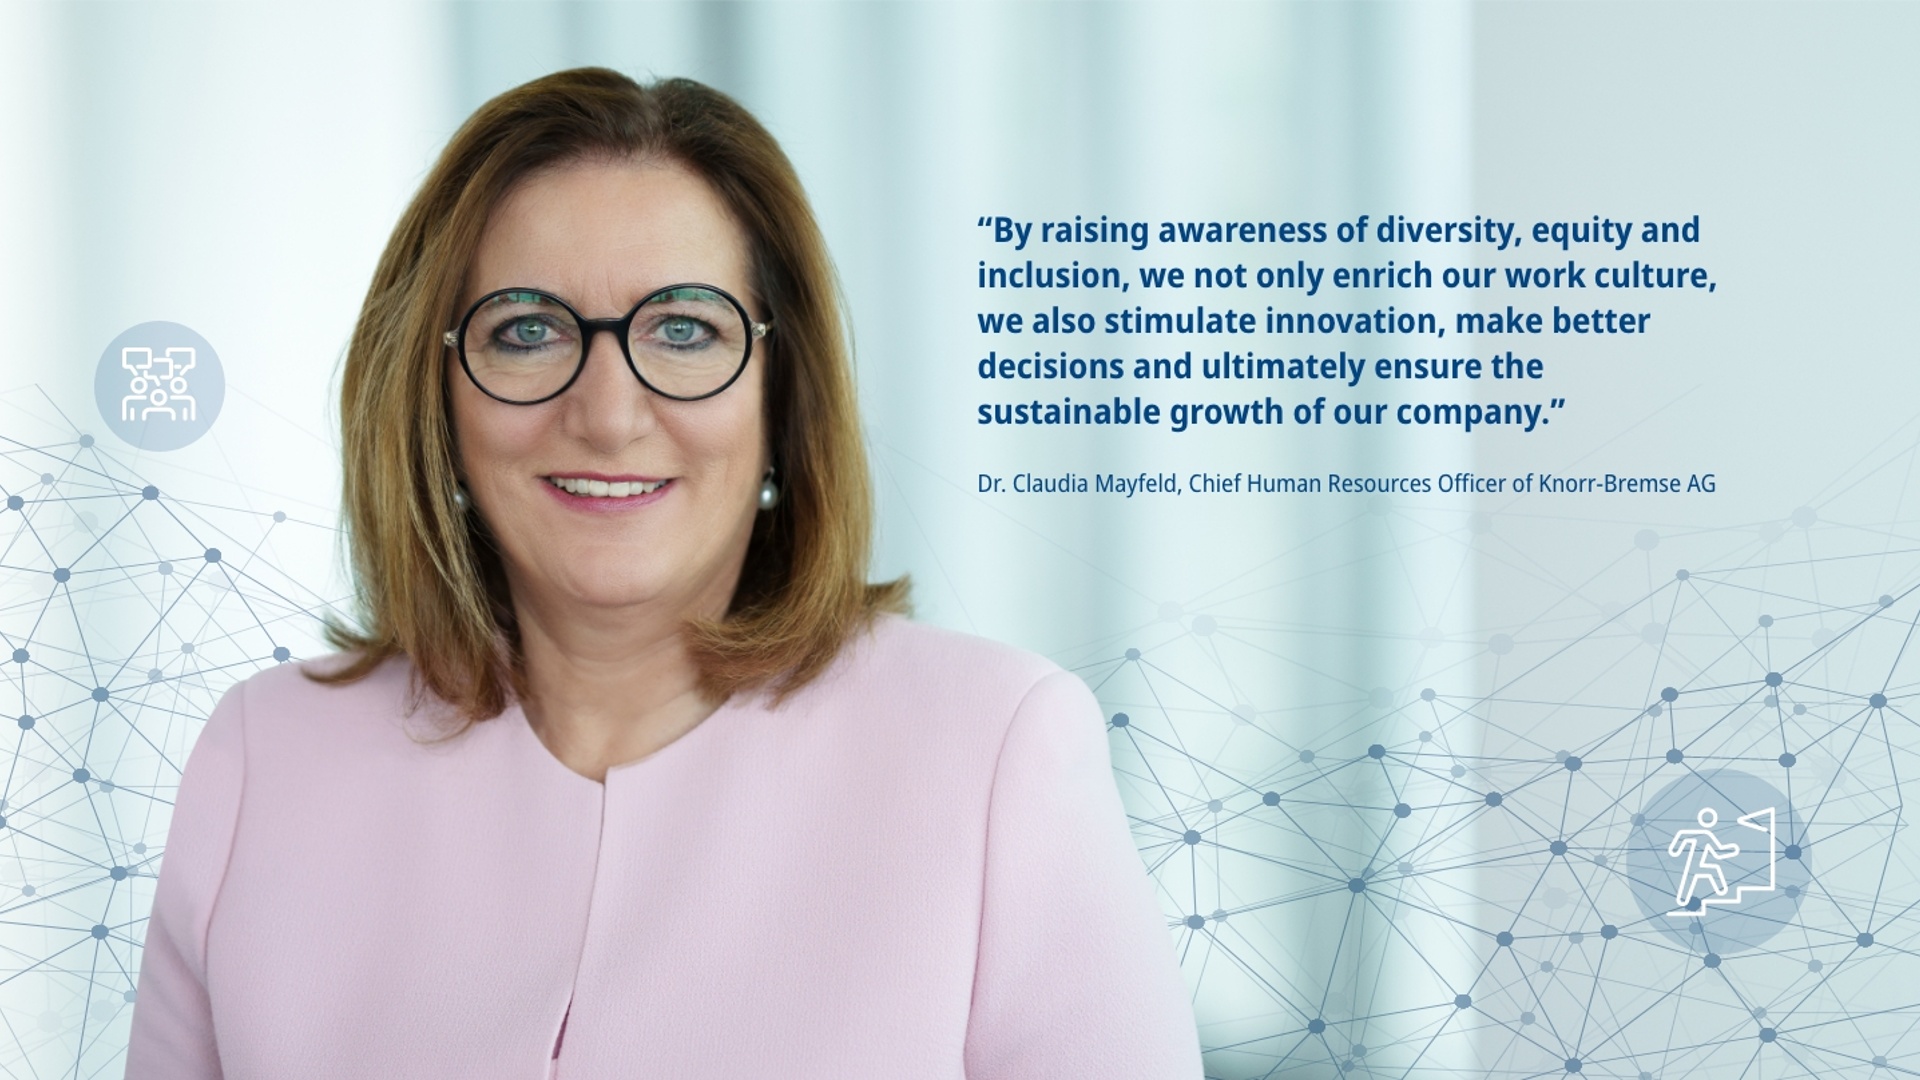 The picture shows a portrait of Dr. Claudia Mayfeld, member of the Executive Board of Knorr-Bremse AG, and the following quote on the topic of cultural change: "By raising awareness of diversity, equity and inclusion, we not only enrich our work culture, we also stimulate innovation, make better decisions and ultimately ensure the sustainable growth of our company."